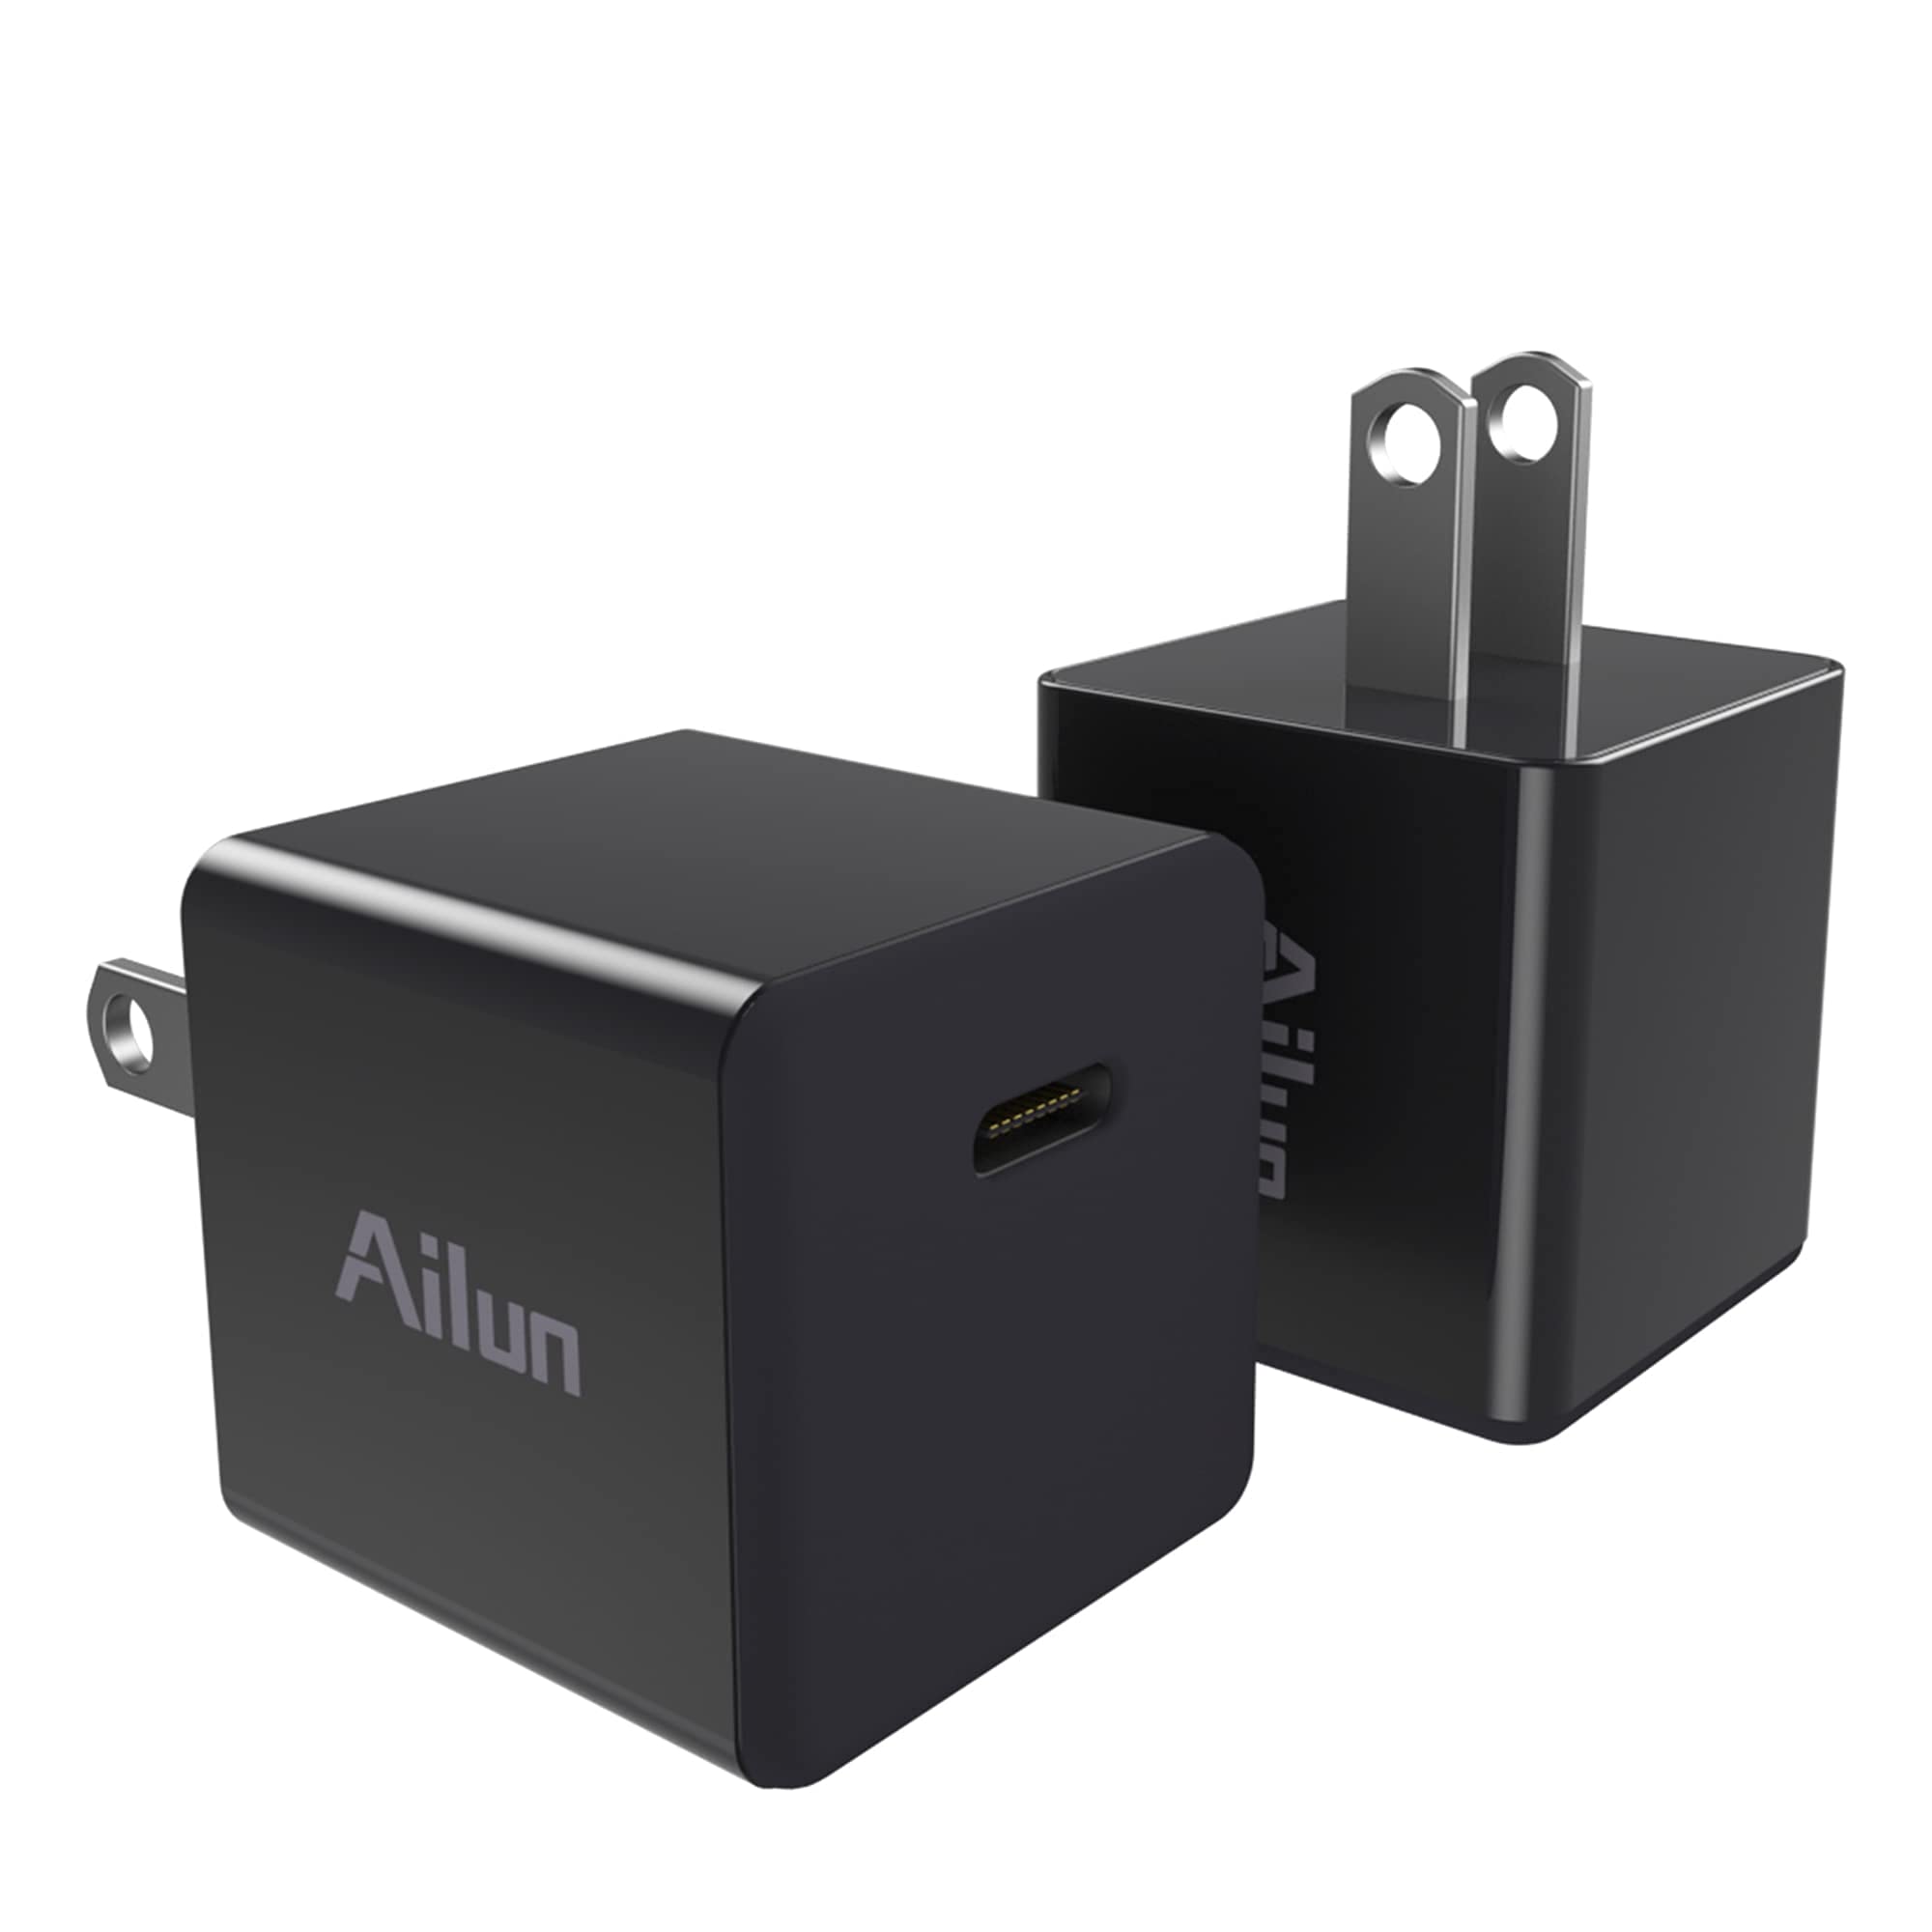 Ailun 2Pack 20W USB C Power Adapter,PD Port Thumb Wall Charger Block Fast Charge and USB C Thumb Fast Wall Charger Block 20W Power Adapter 1Pack,USB C to Lightning Cable 1Pack